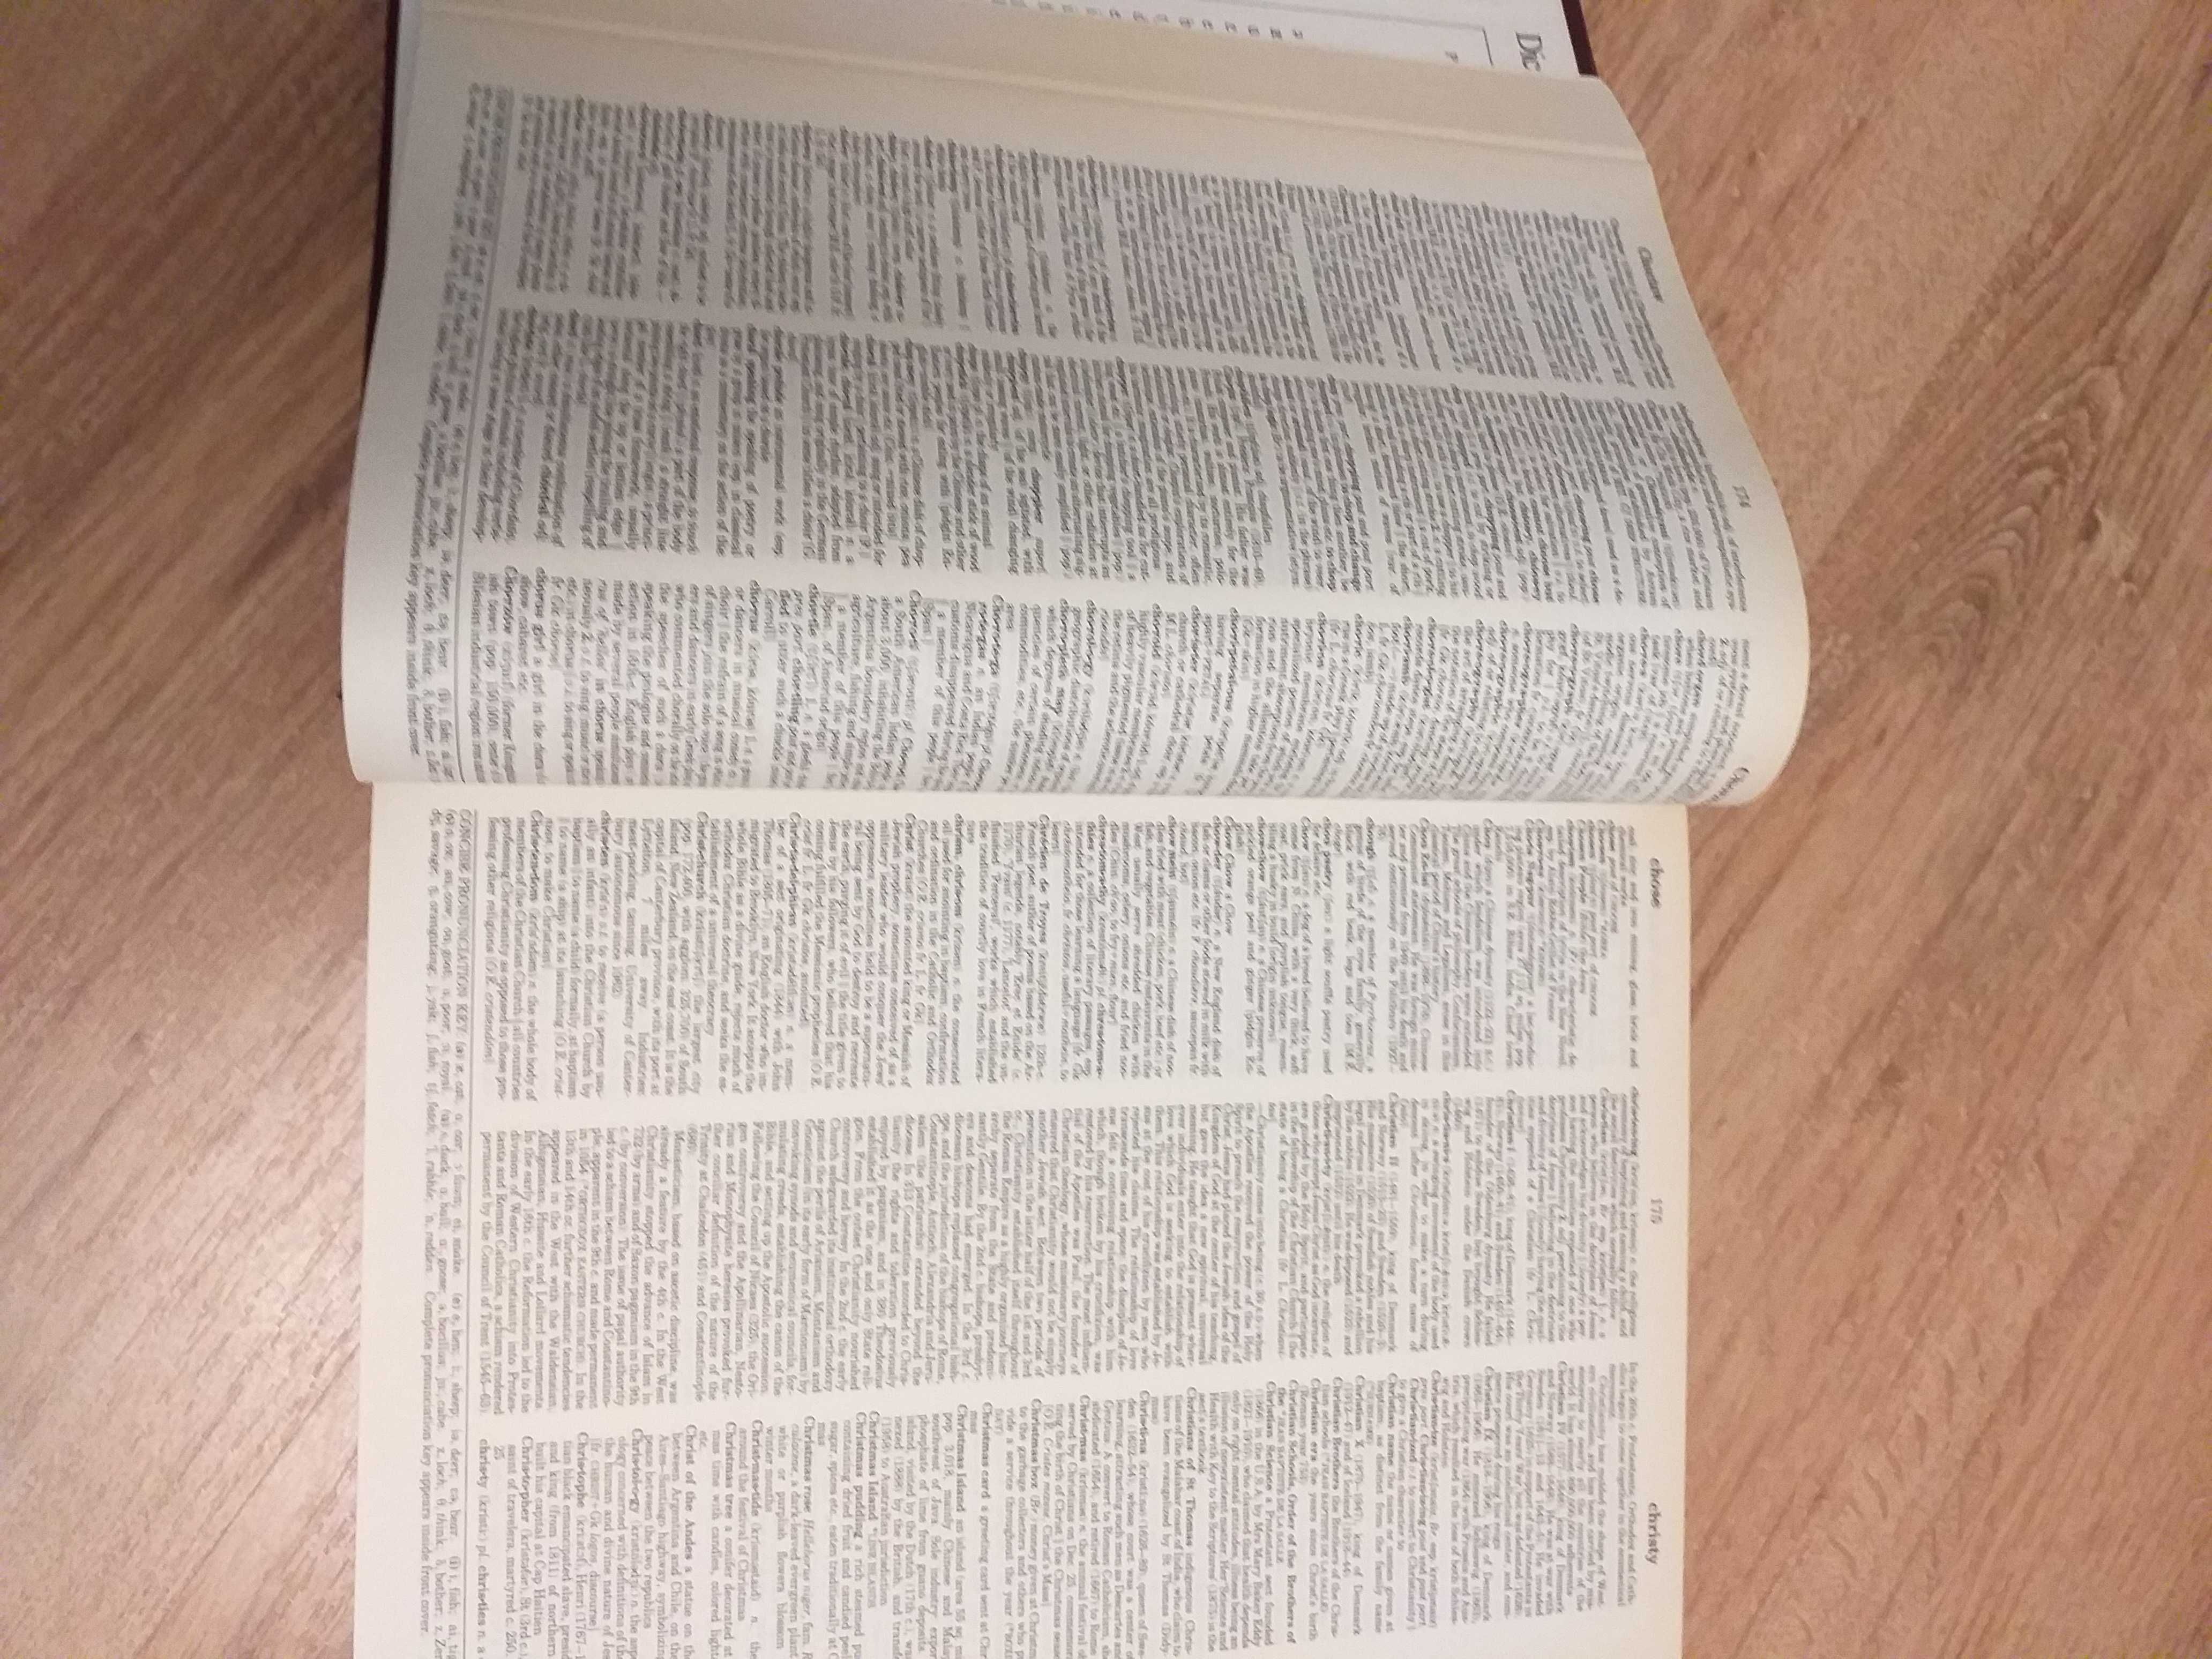 Webster Encyclopedic Dictionary